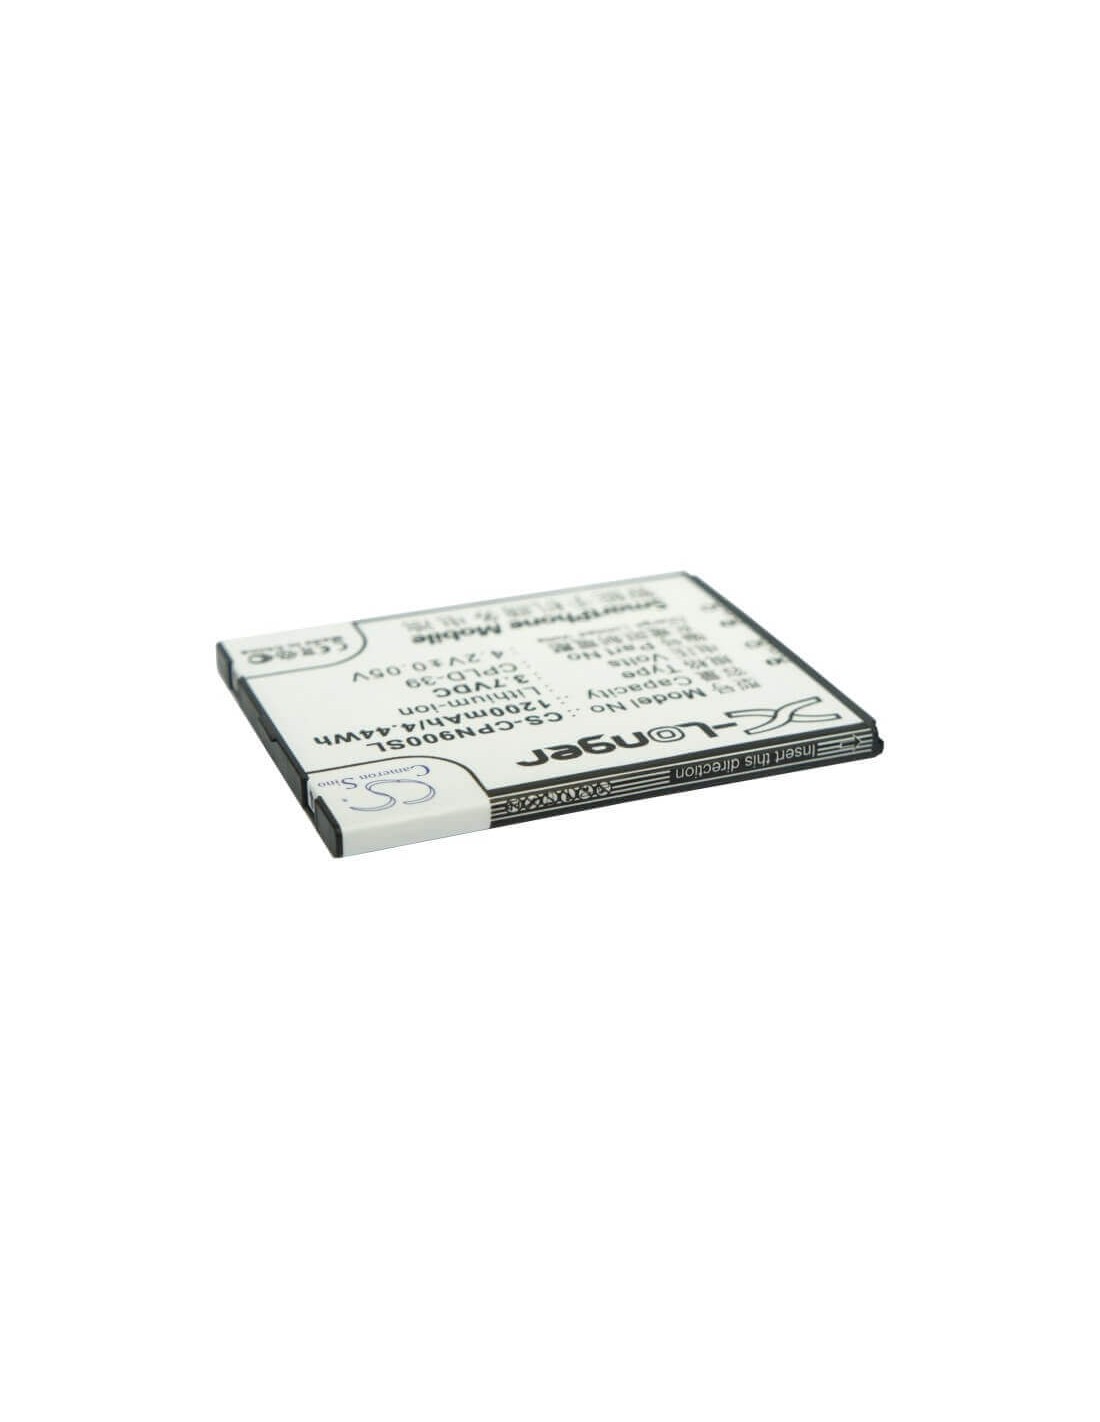 Battery for Coolpad 8900, N900S, 8910 3.7V, 1200mAh - 4.44Wh